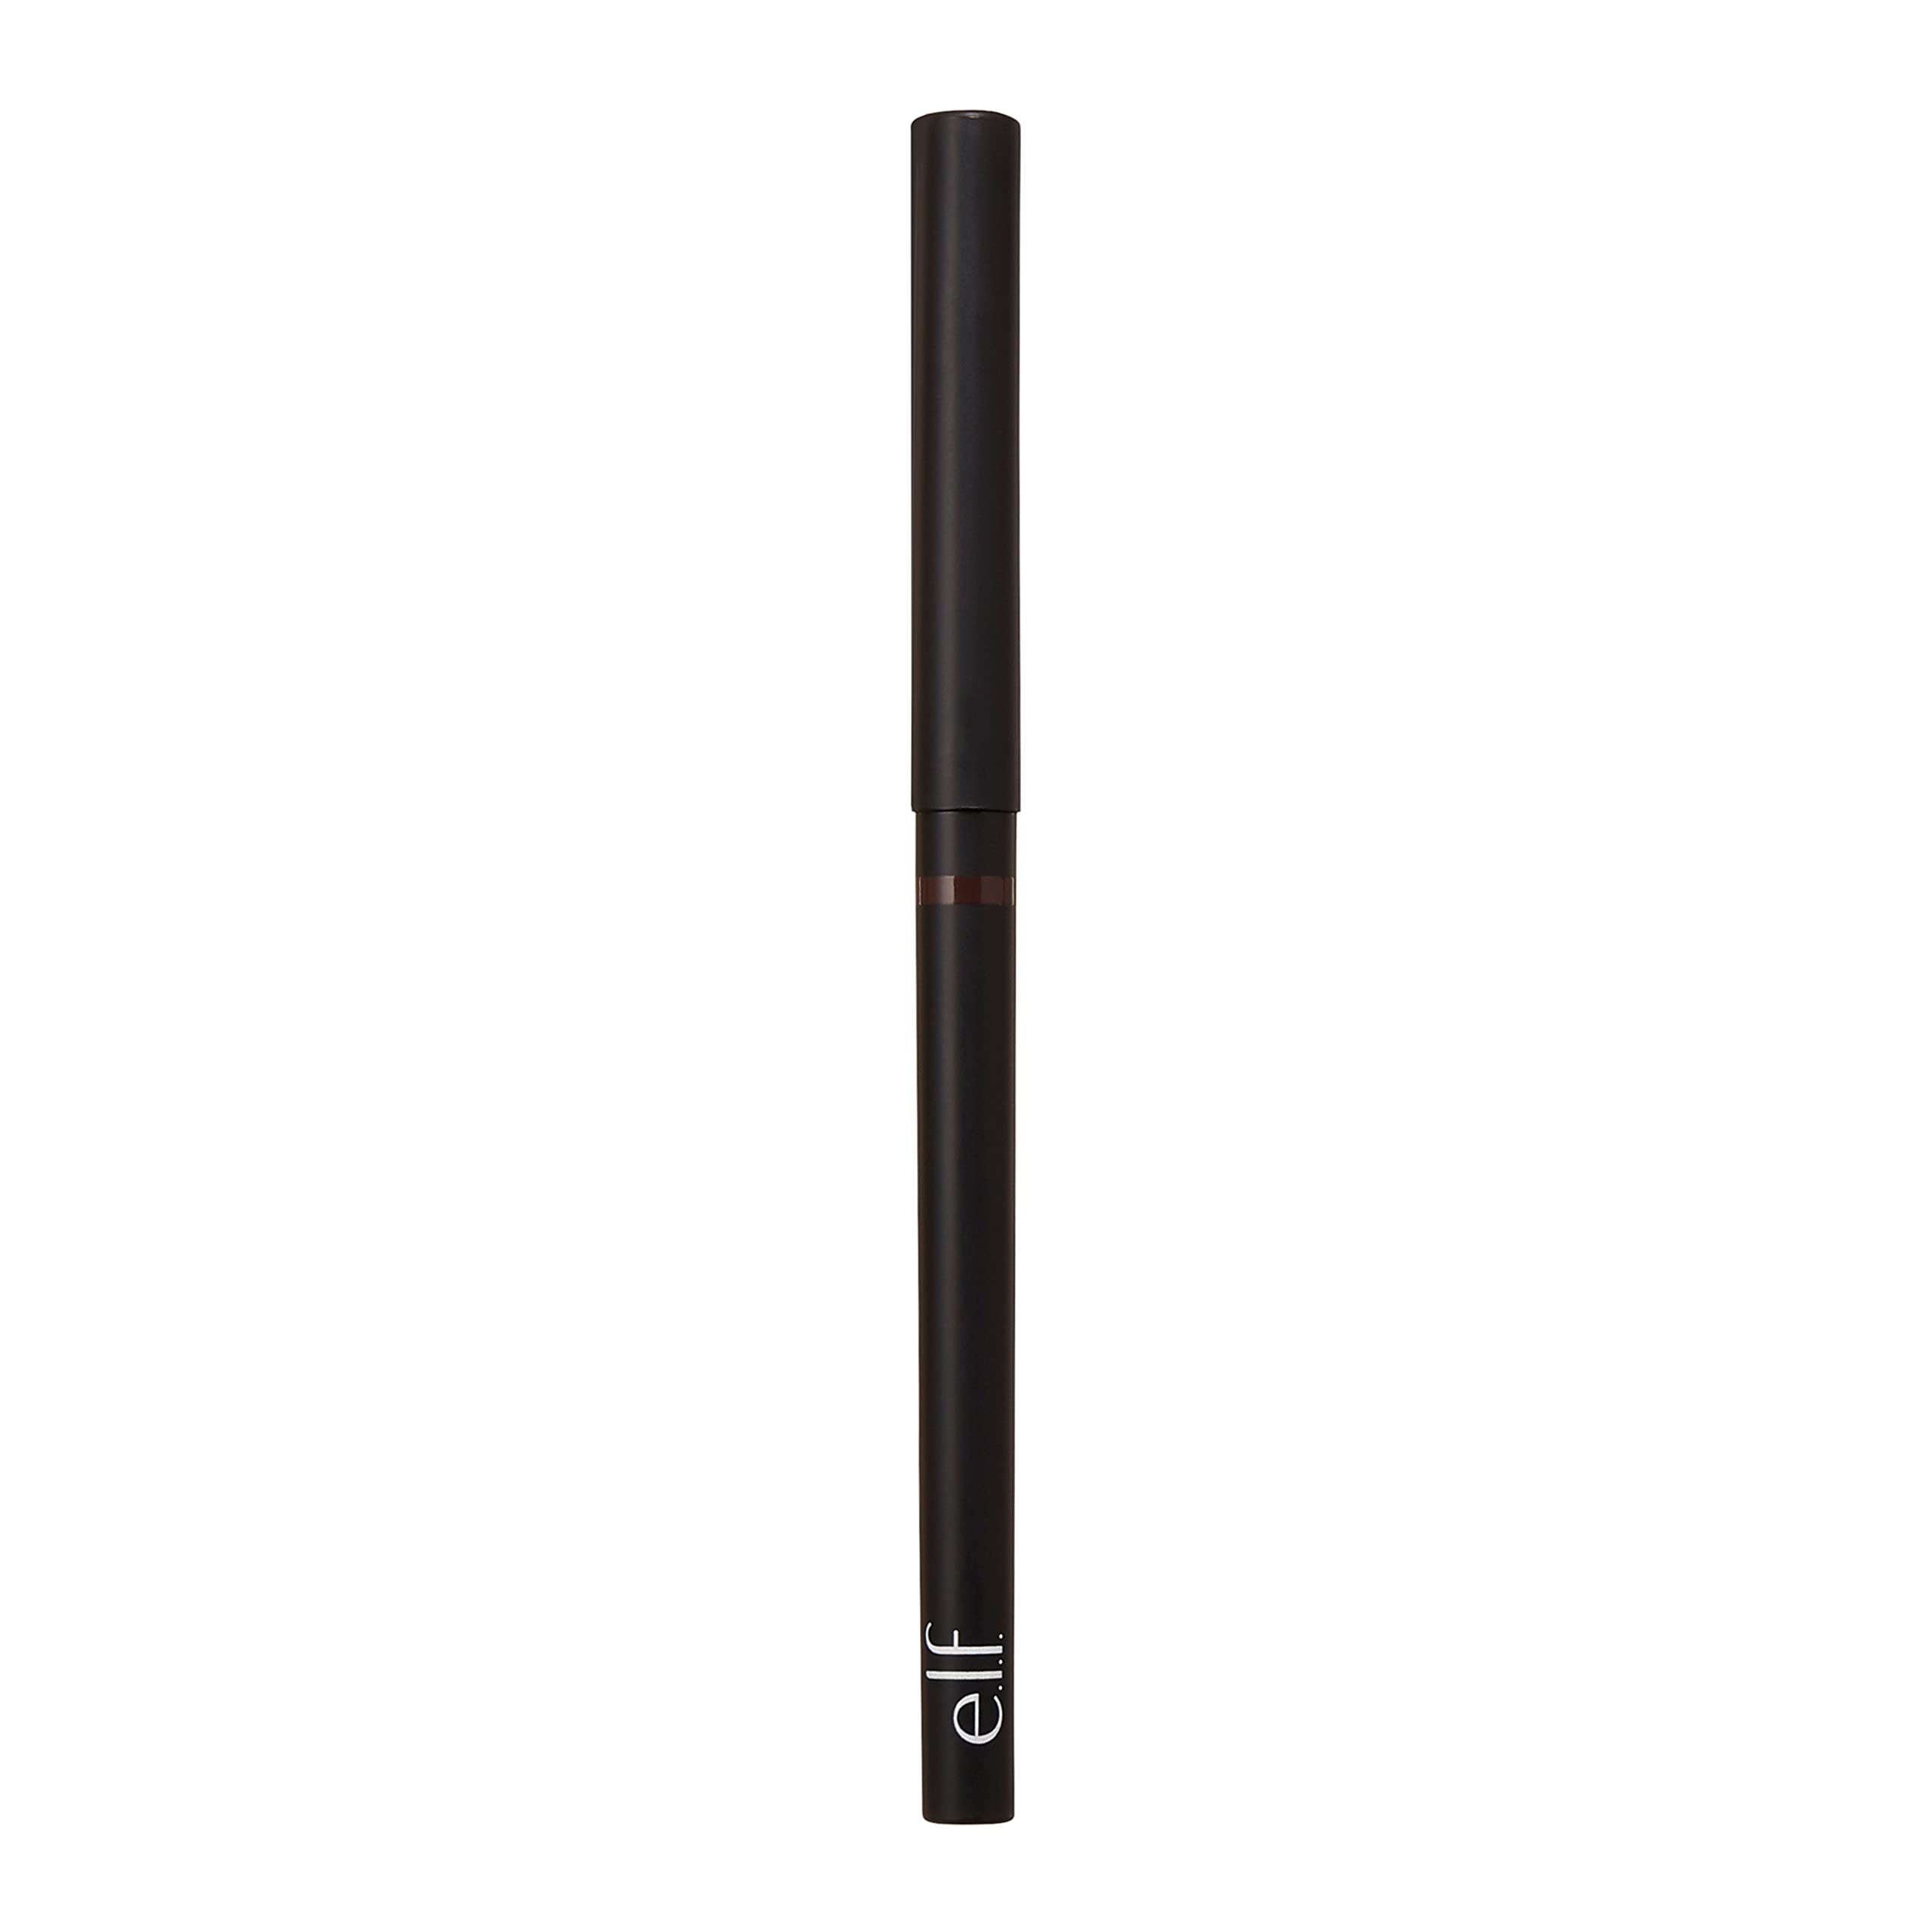 e.l.f., No Budge Retractable Eyeliner, Creamy, Ultra-Pigmented, Long Lasting, Enhances, Defines, Intensifies, Boldens, Brown, All-Day Wear, 0.006 Oz